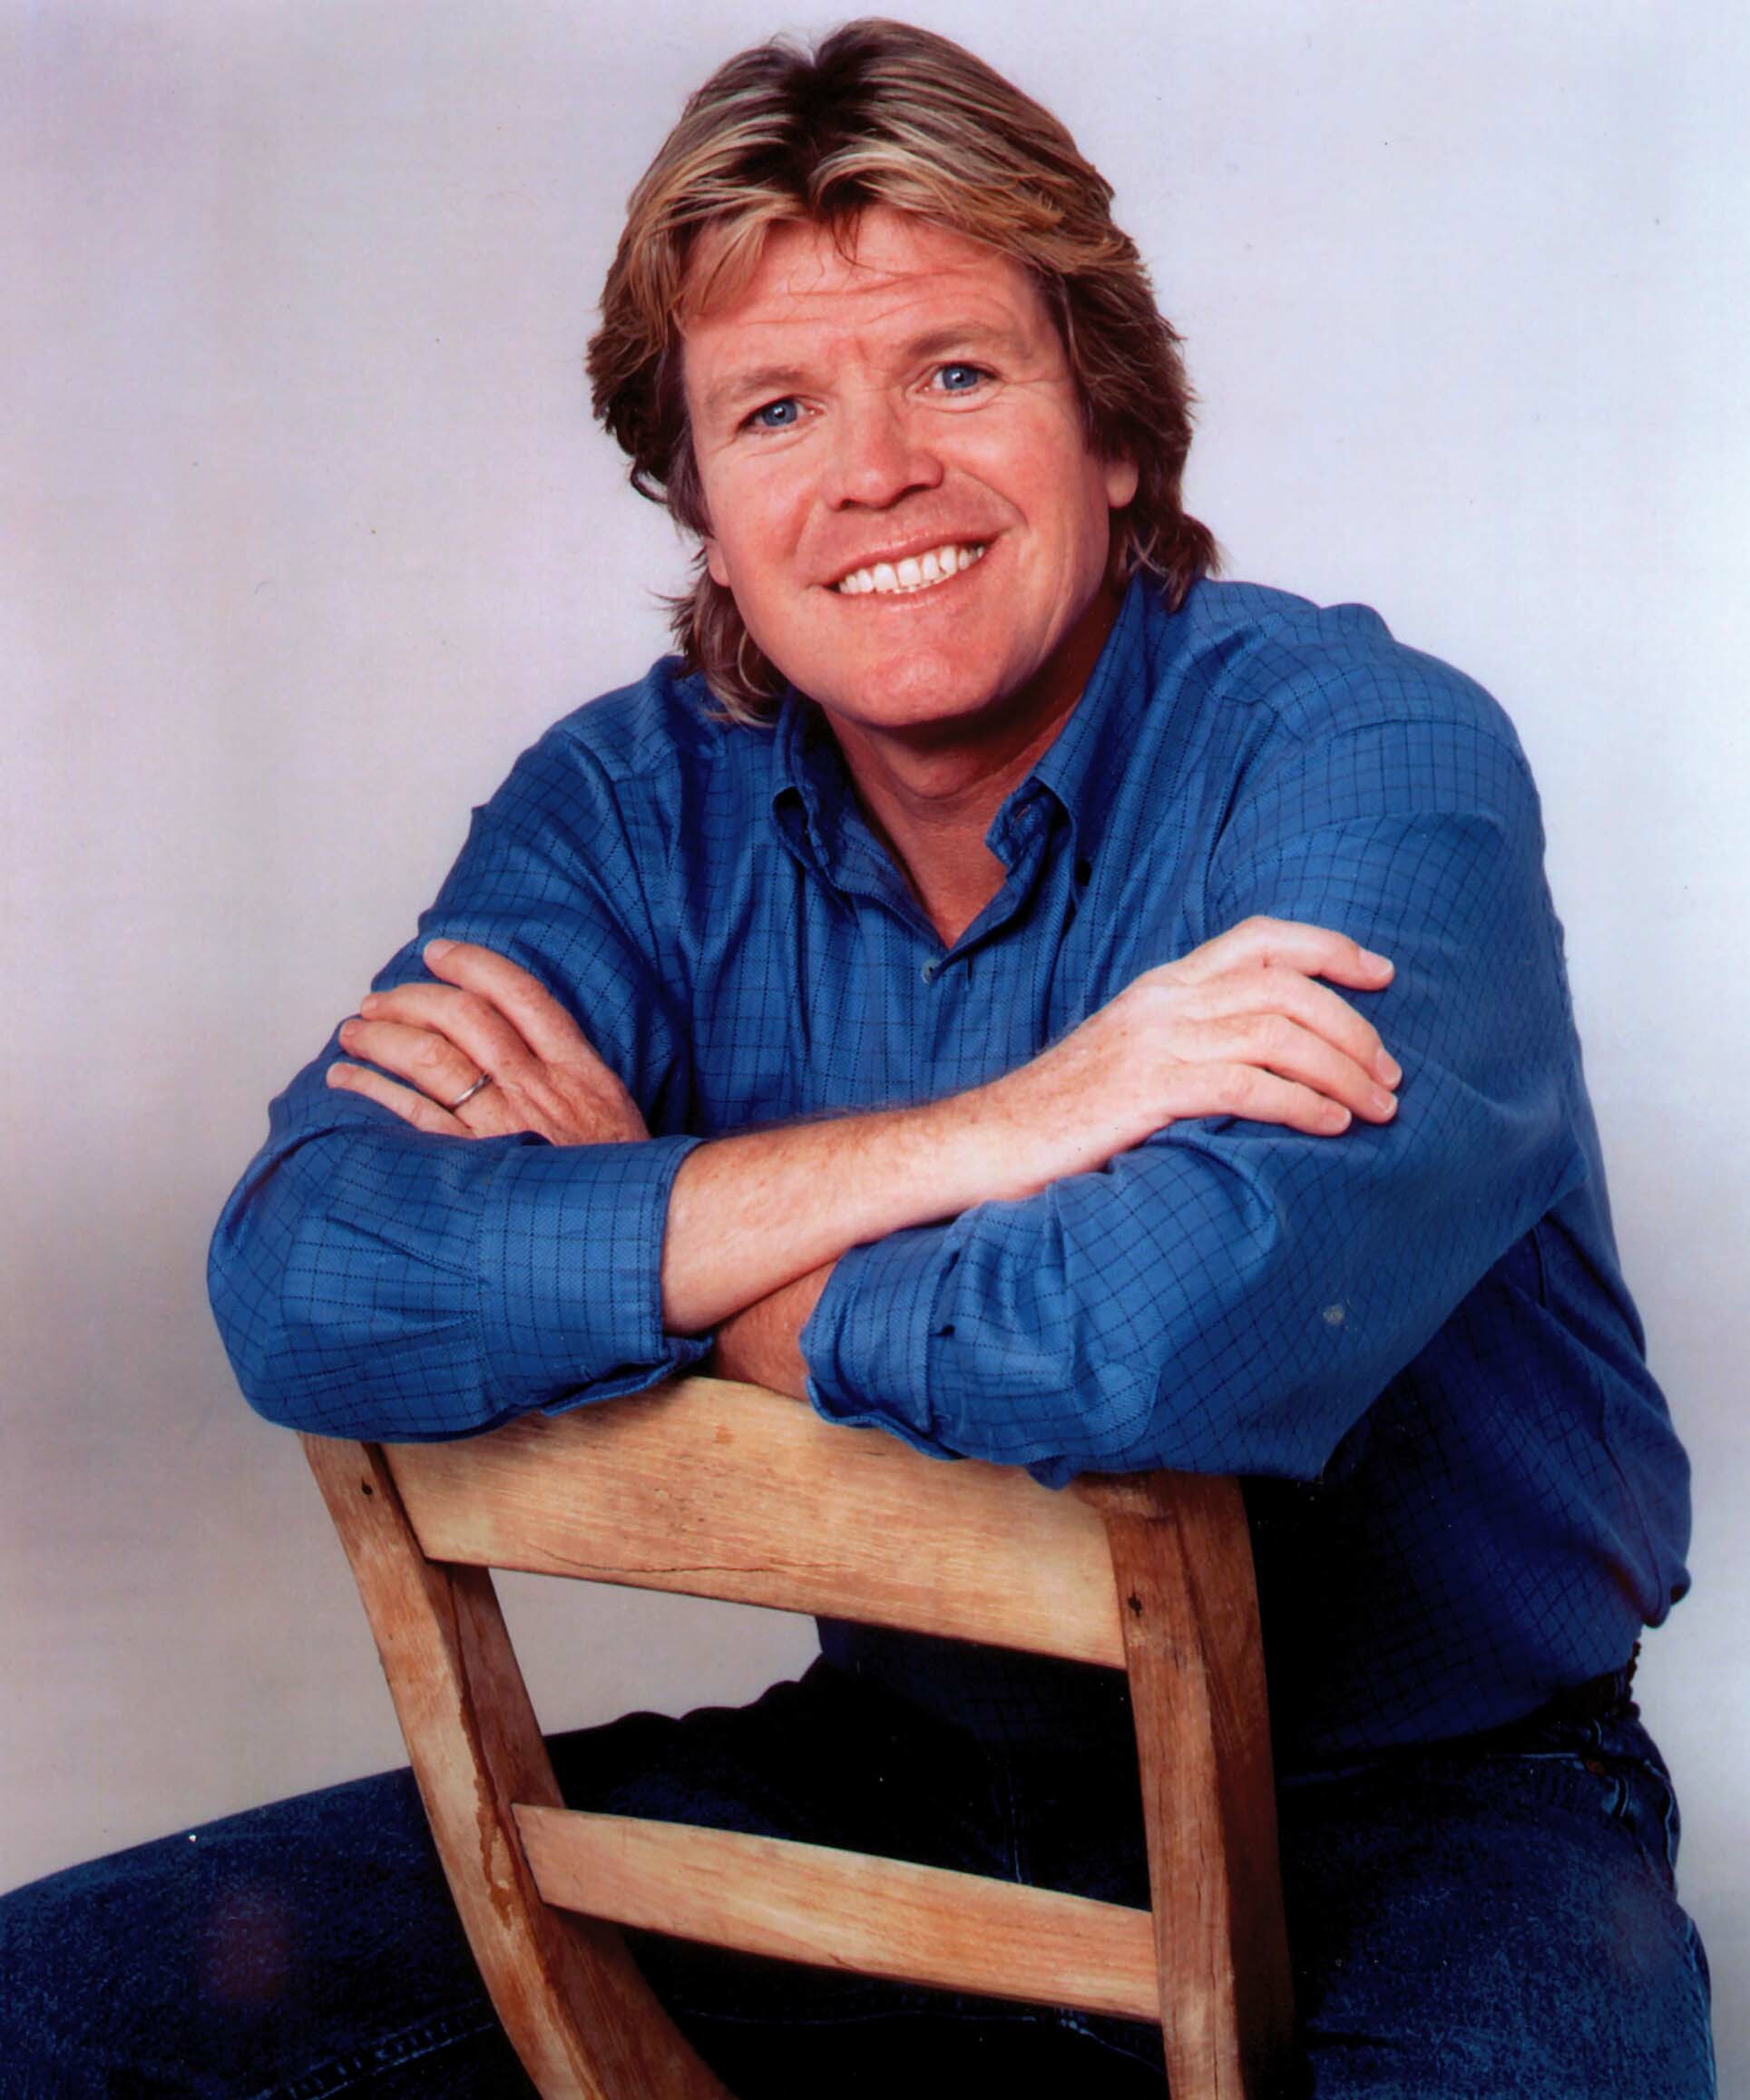 Peter Noone of Herman's Hermits packed the Suffolk Theater house when he played there in early April. COURTESY THE ARTIST